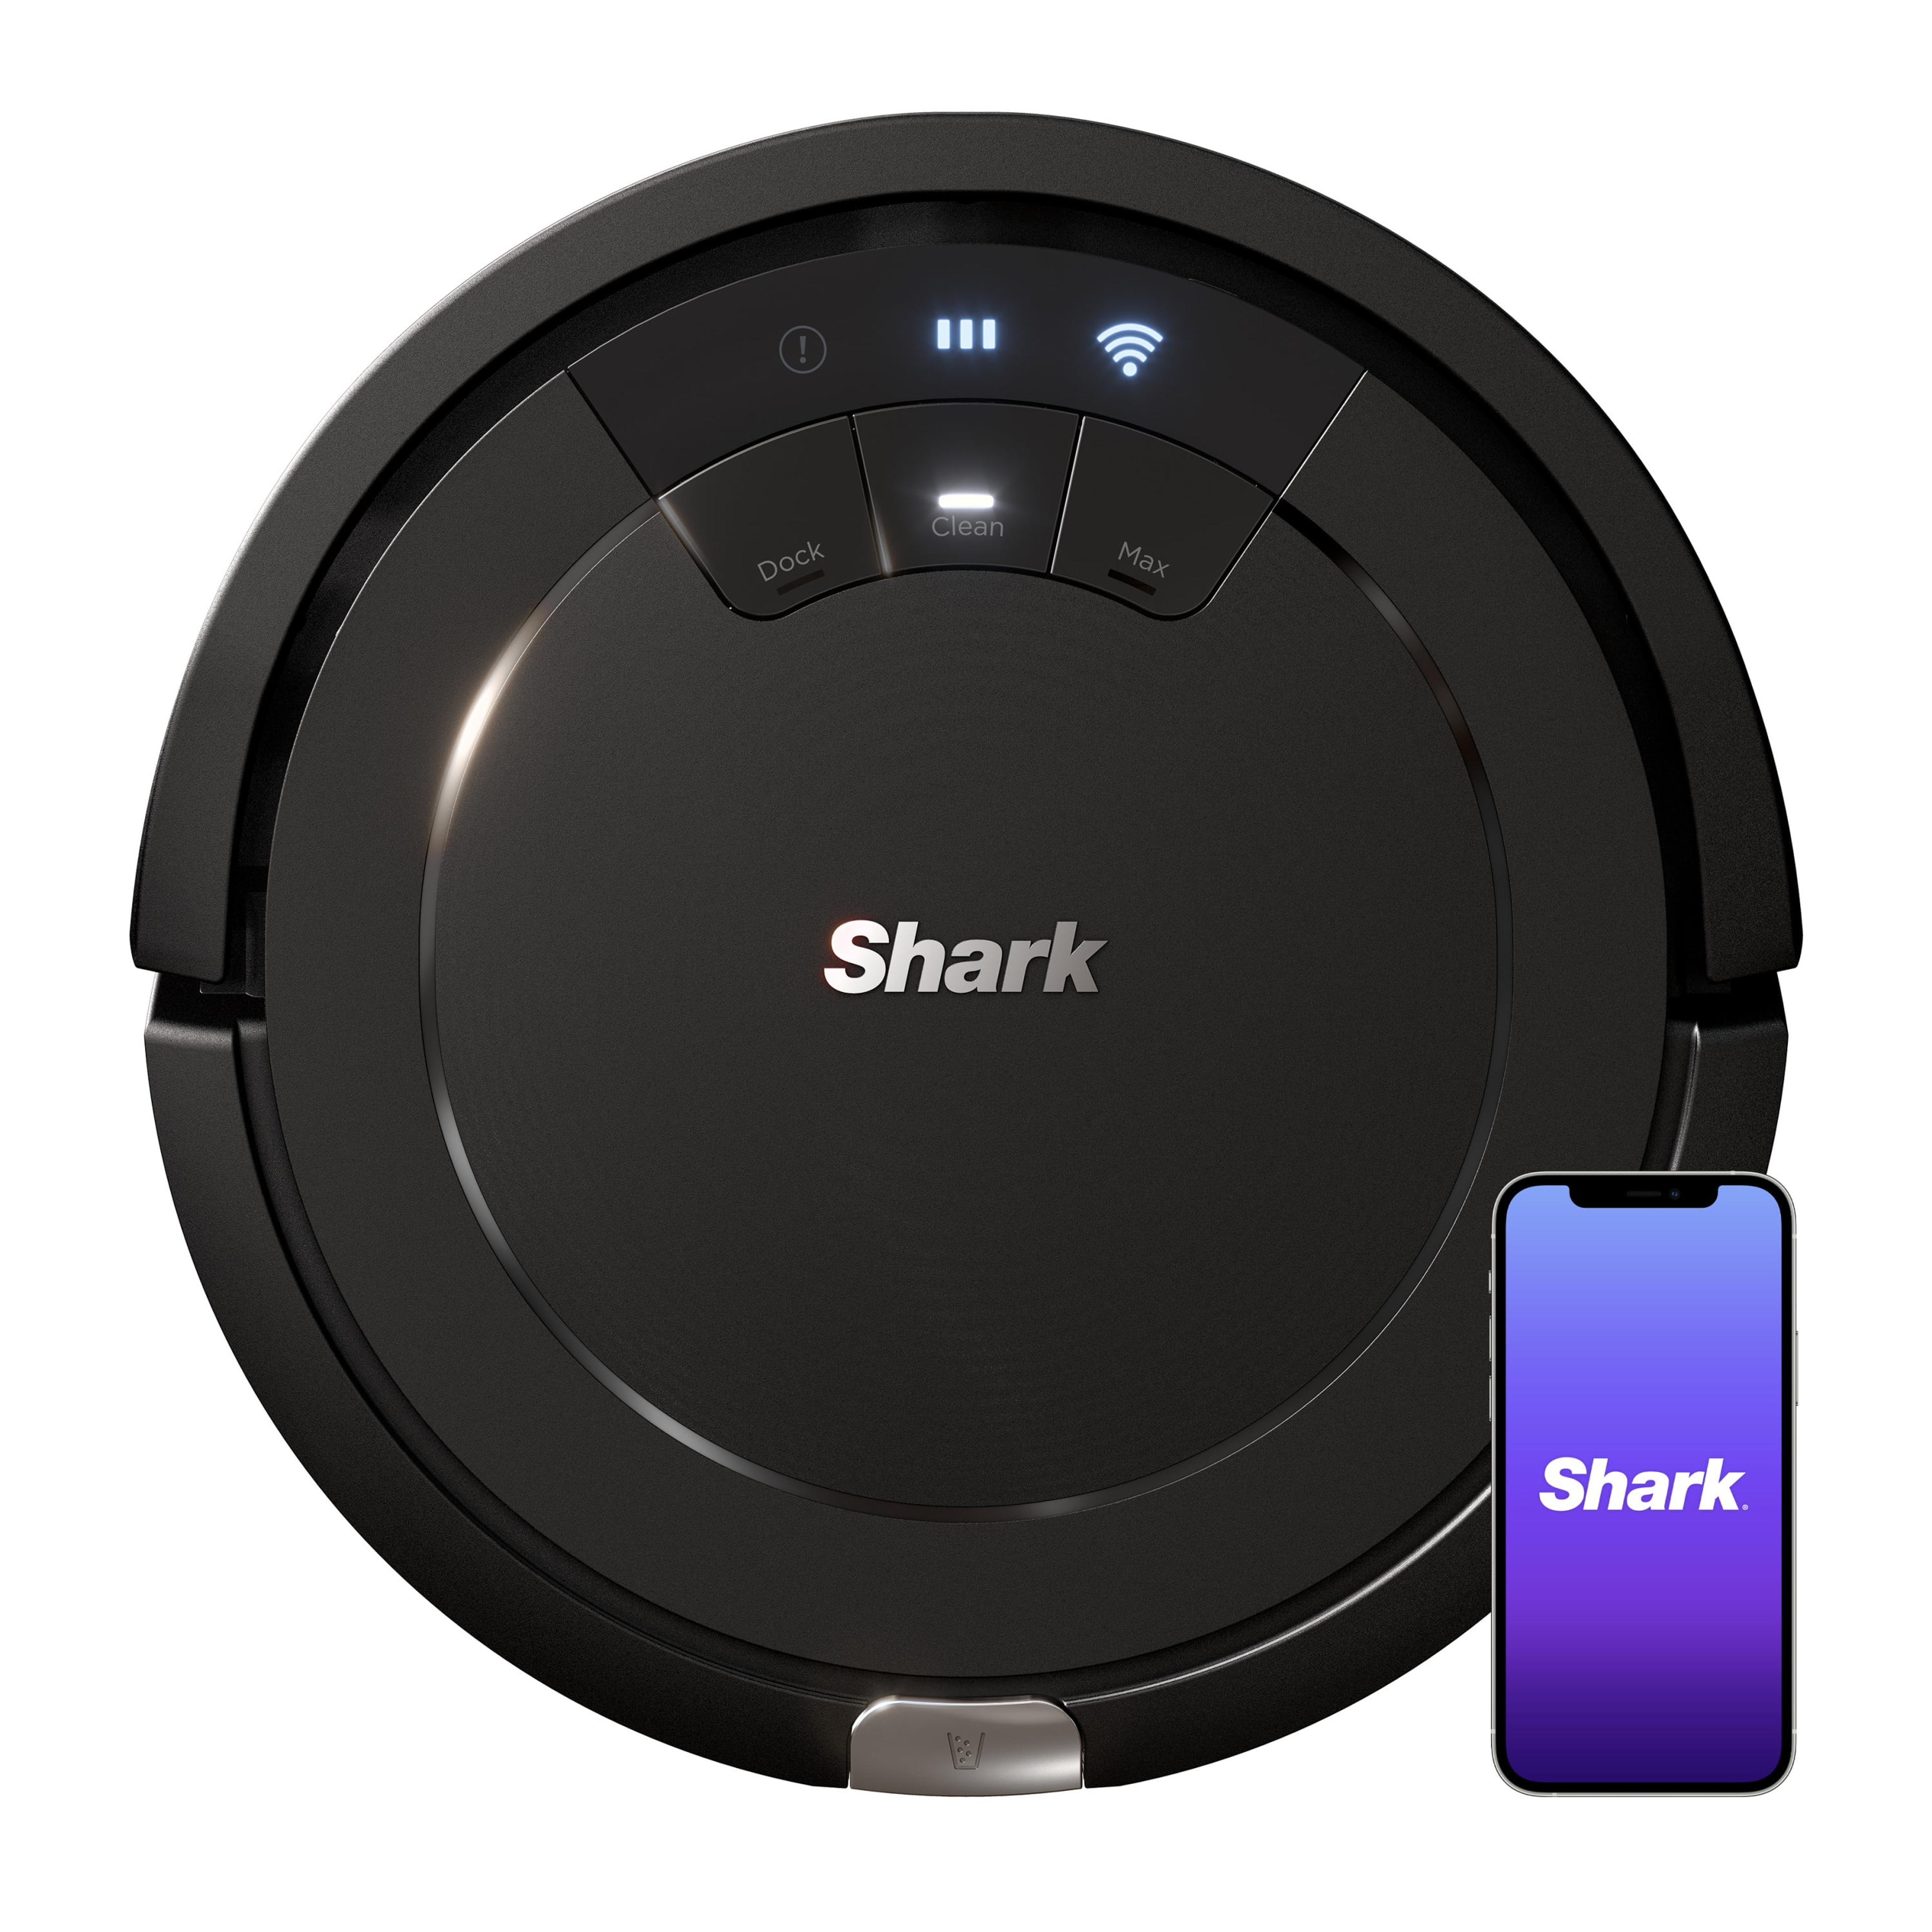 Shark ION Robot Vacuum, Wi-Fi Connected, Works with Google Assistant, Multi-Surface Cleaning, Carpets, Hard Floors, Black (RV754) - Walmart.com